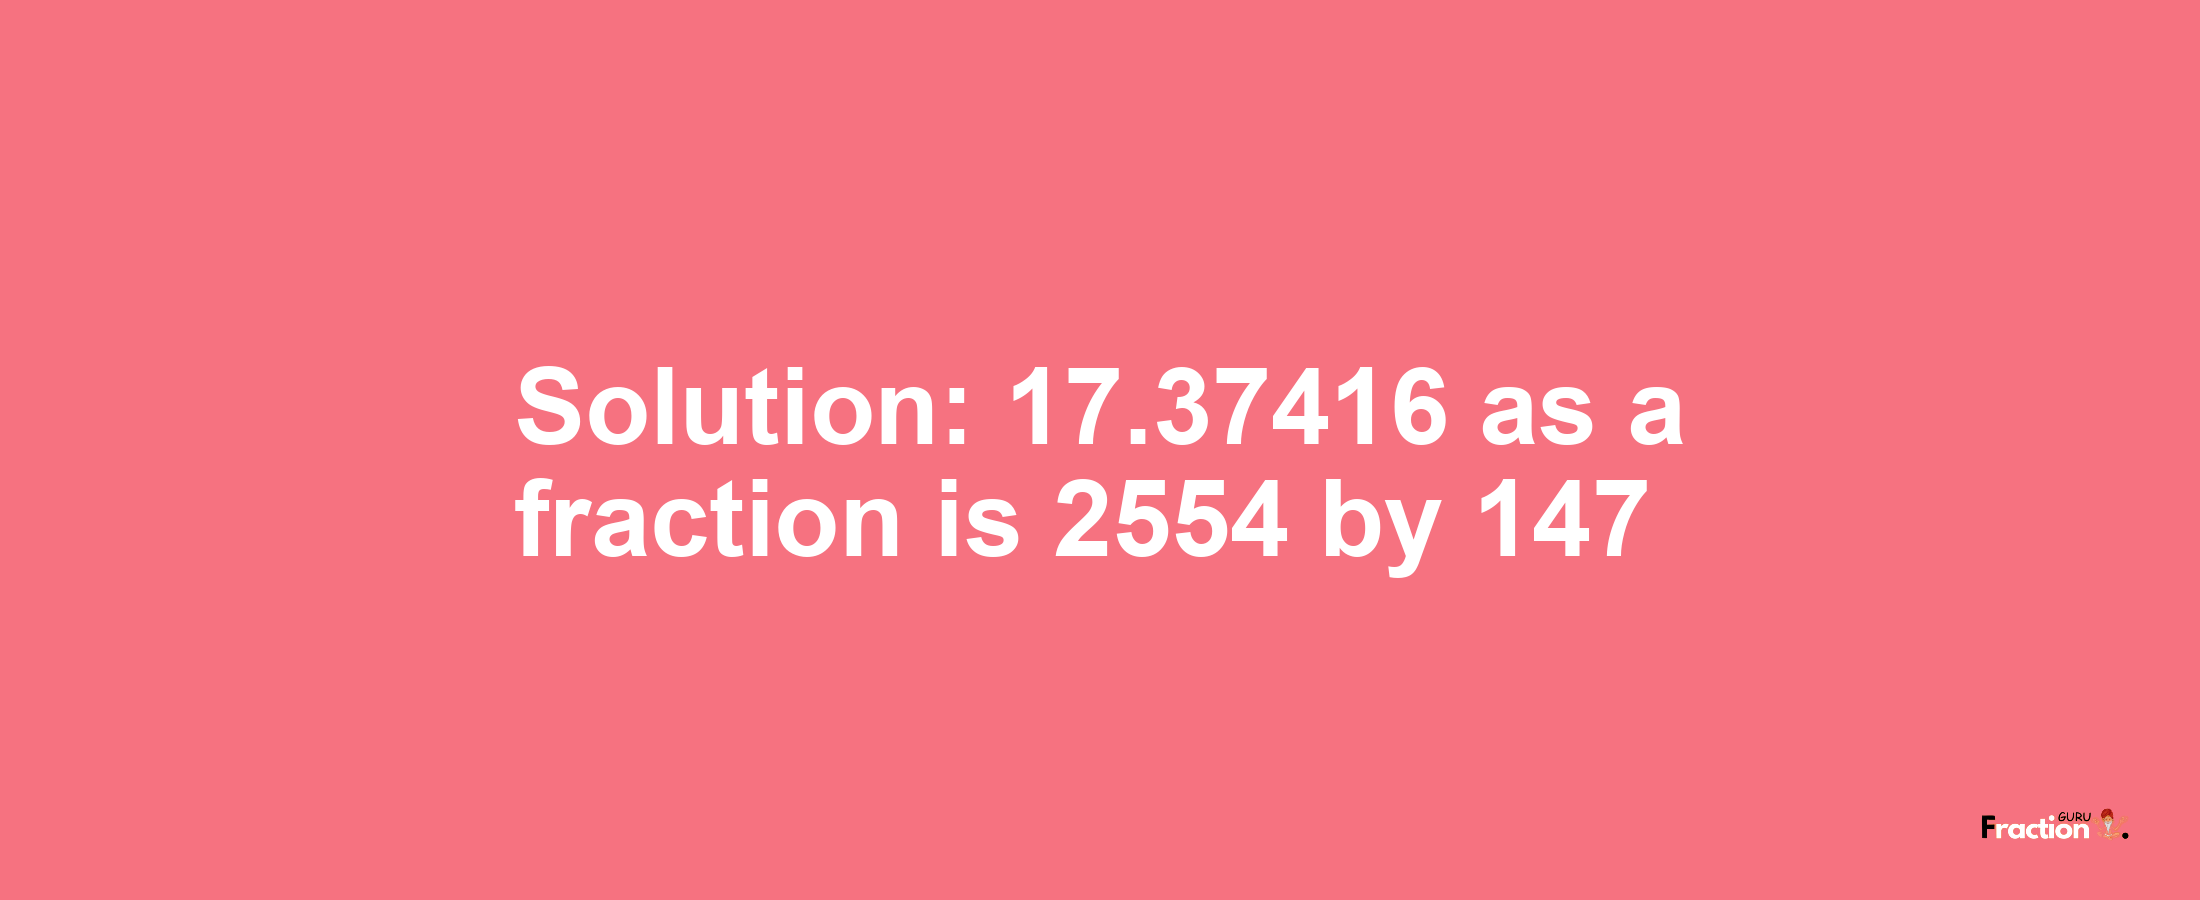 Solution:17.37416 as a fraction is 2554/147